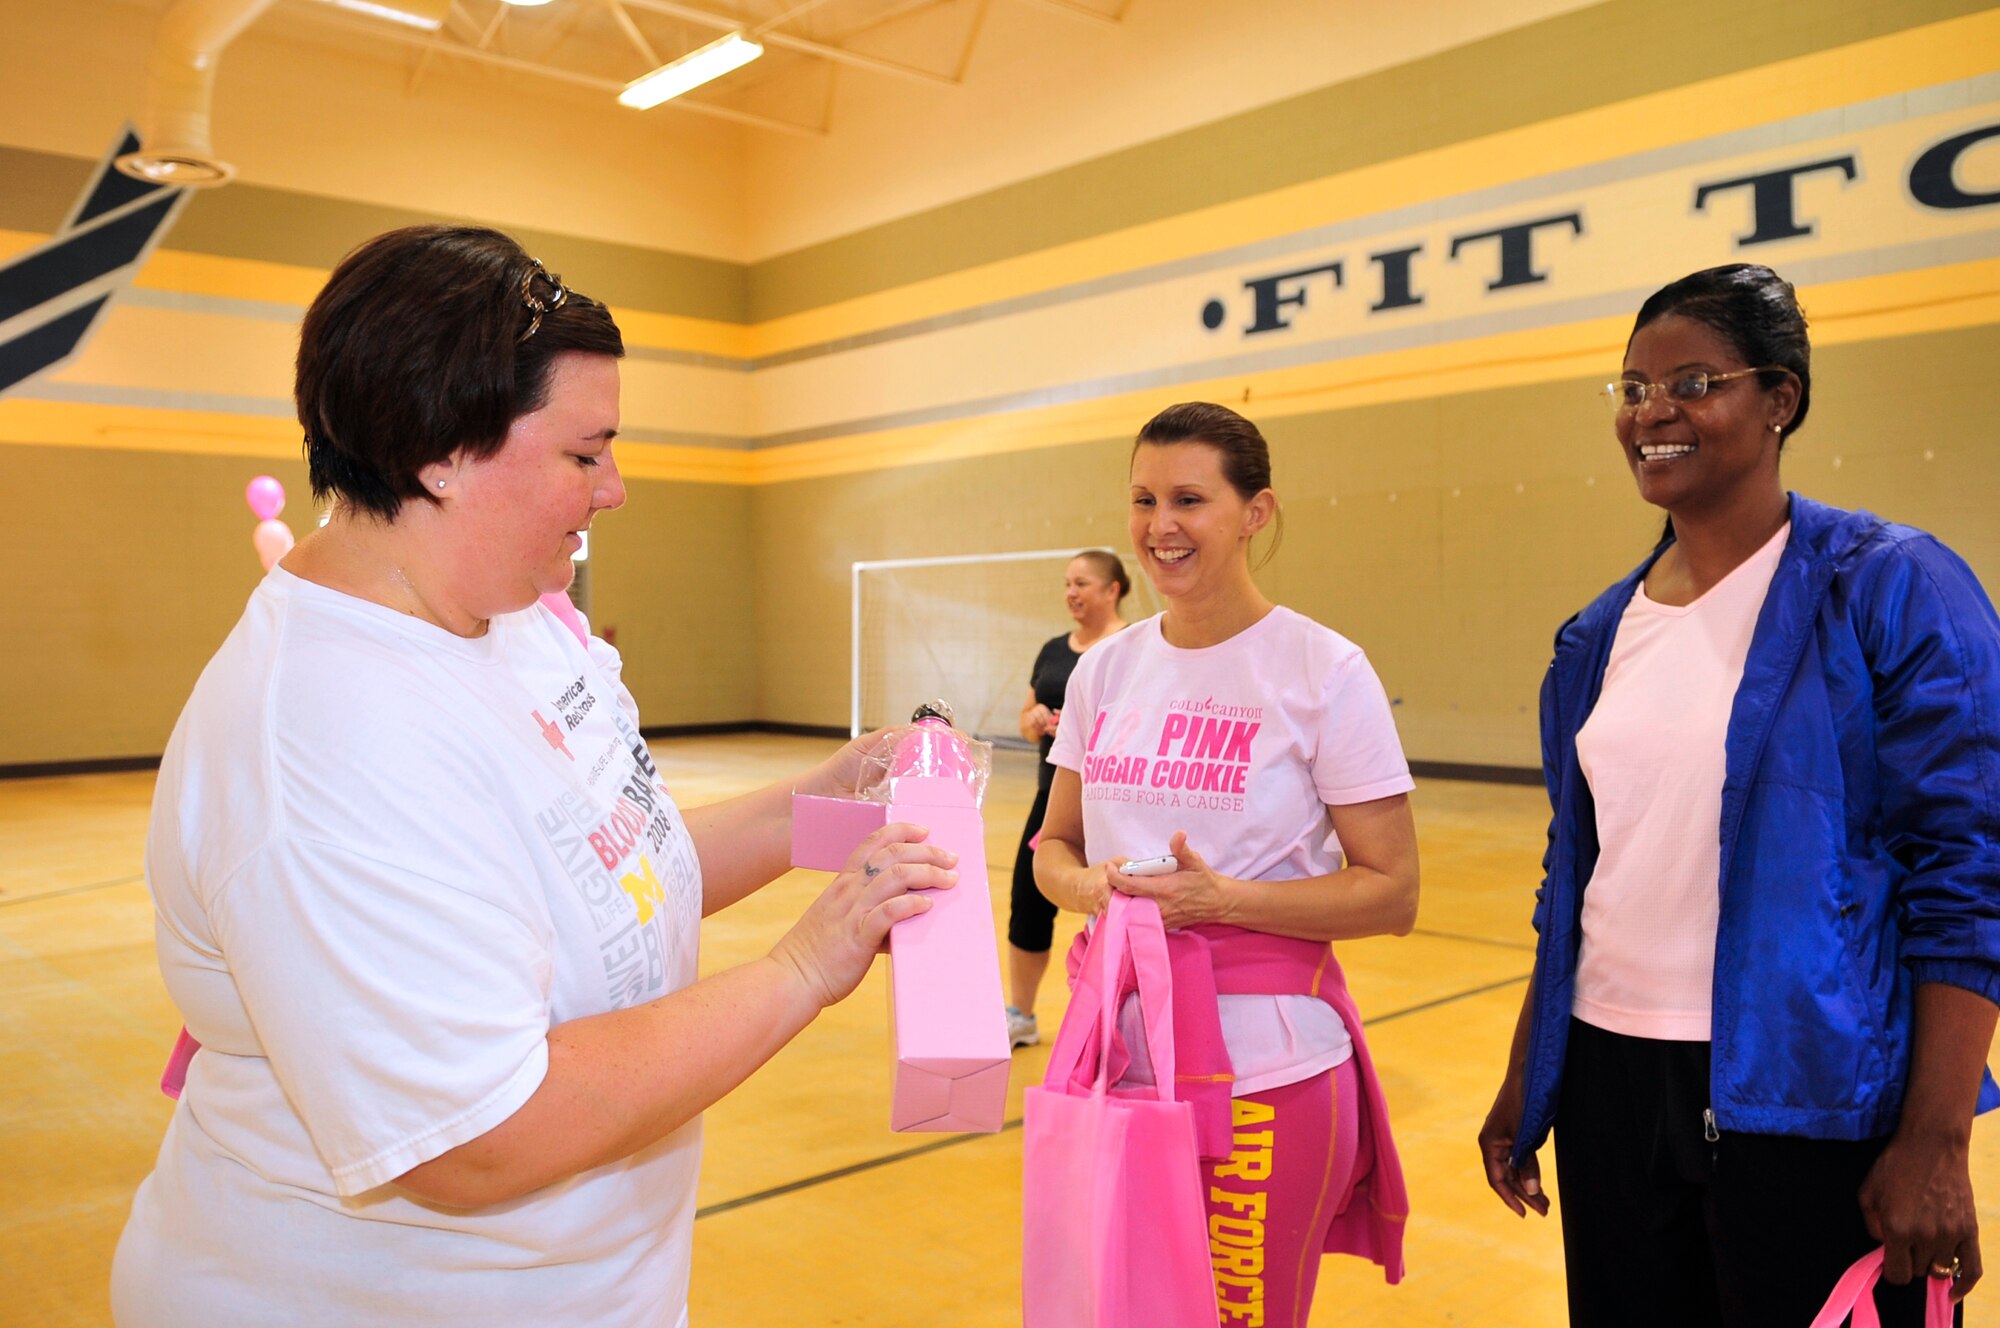 U.S. Air Force Airmen win prizes from a raffle at the annual breast cancer awareness walk at the fitness center, Shaw Air Force Base, S.C., Oct. 2, 2012.  The event was held by the Health and Wellness Center along with the 20th Medical Group.  More than 100 people participated in the walk. (U.S. Air Force photo by Airman Nicole Sikorski/Released)